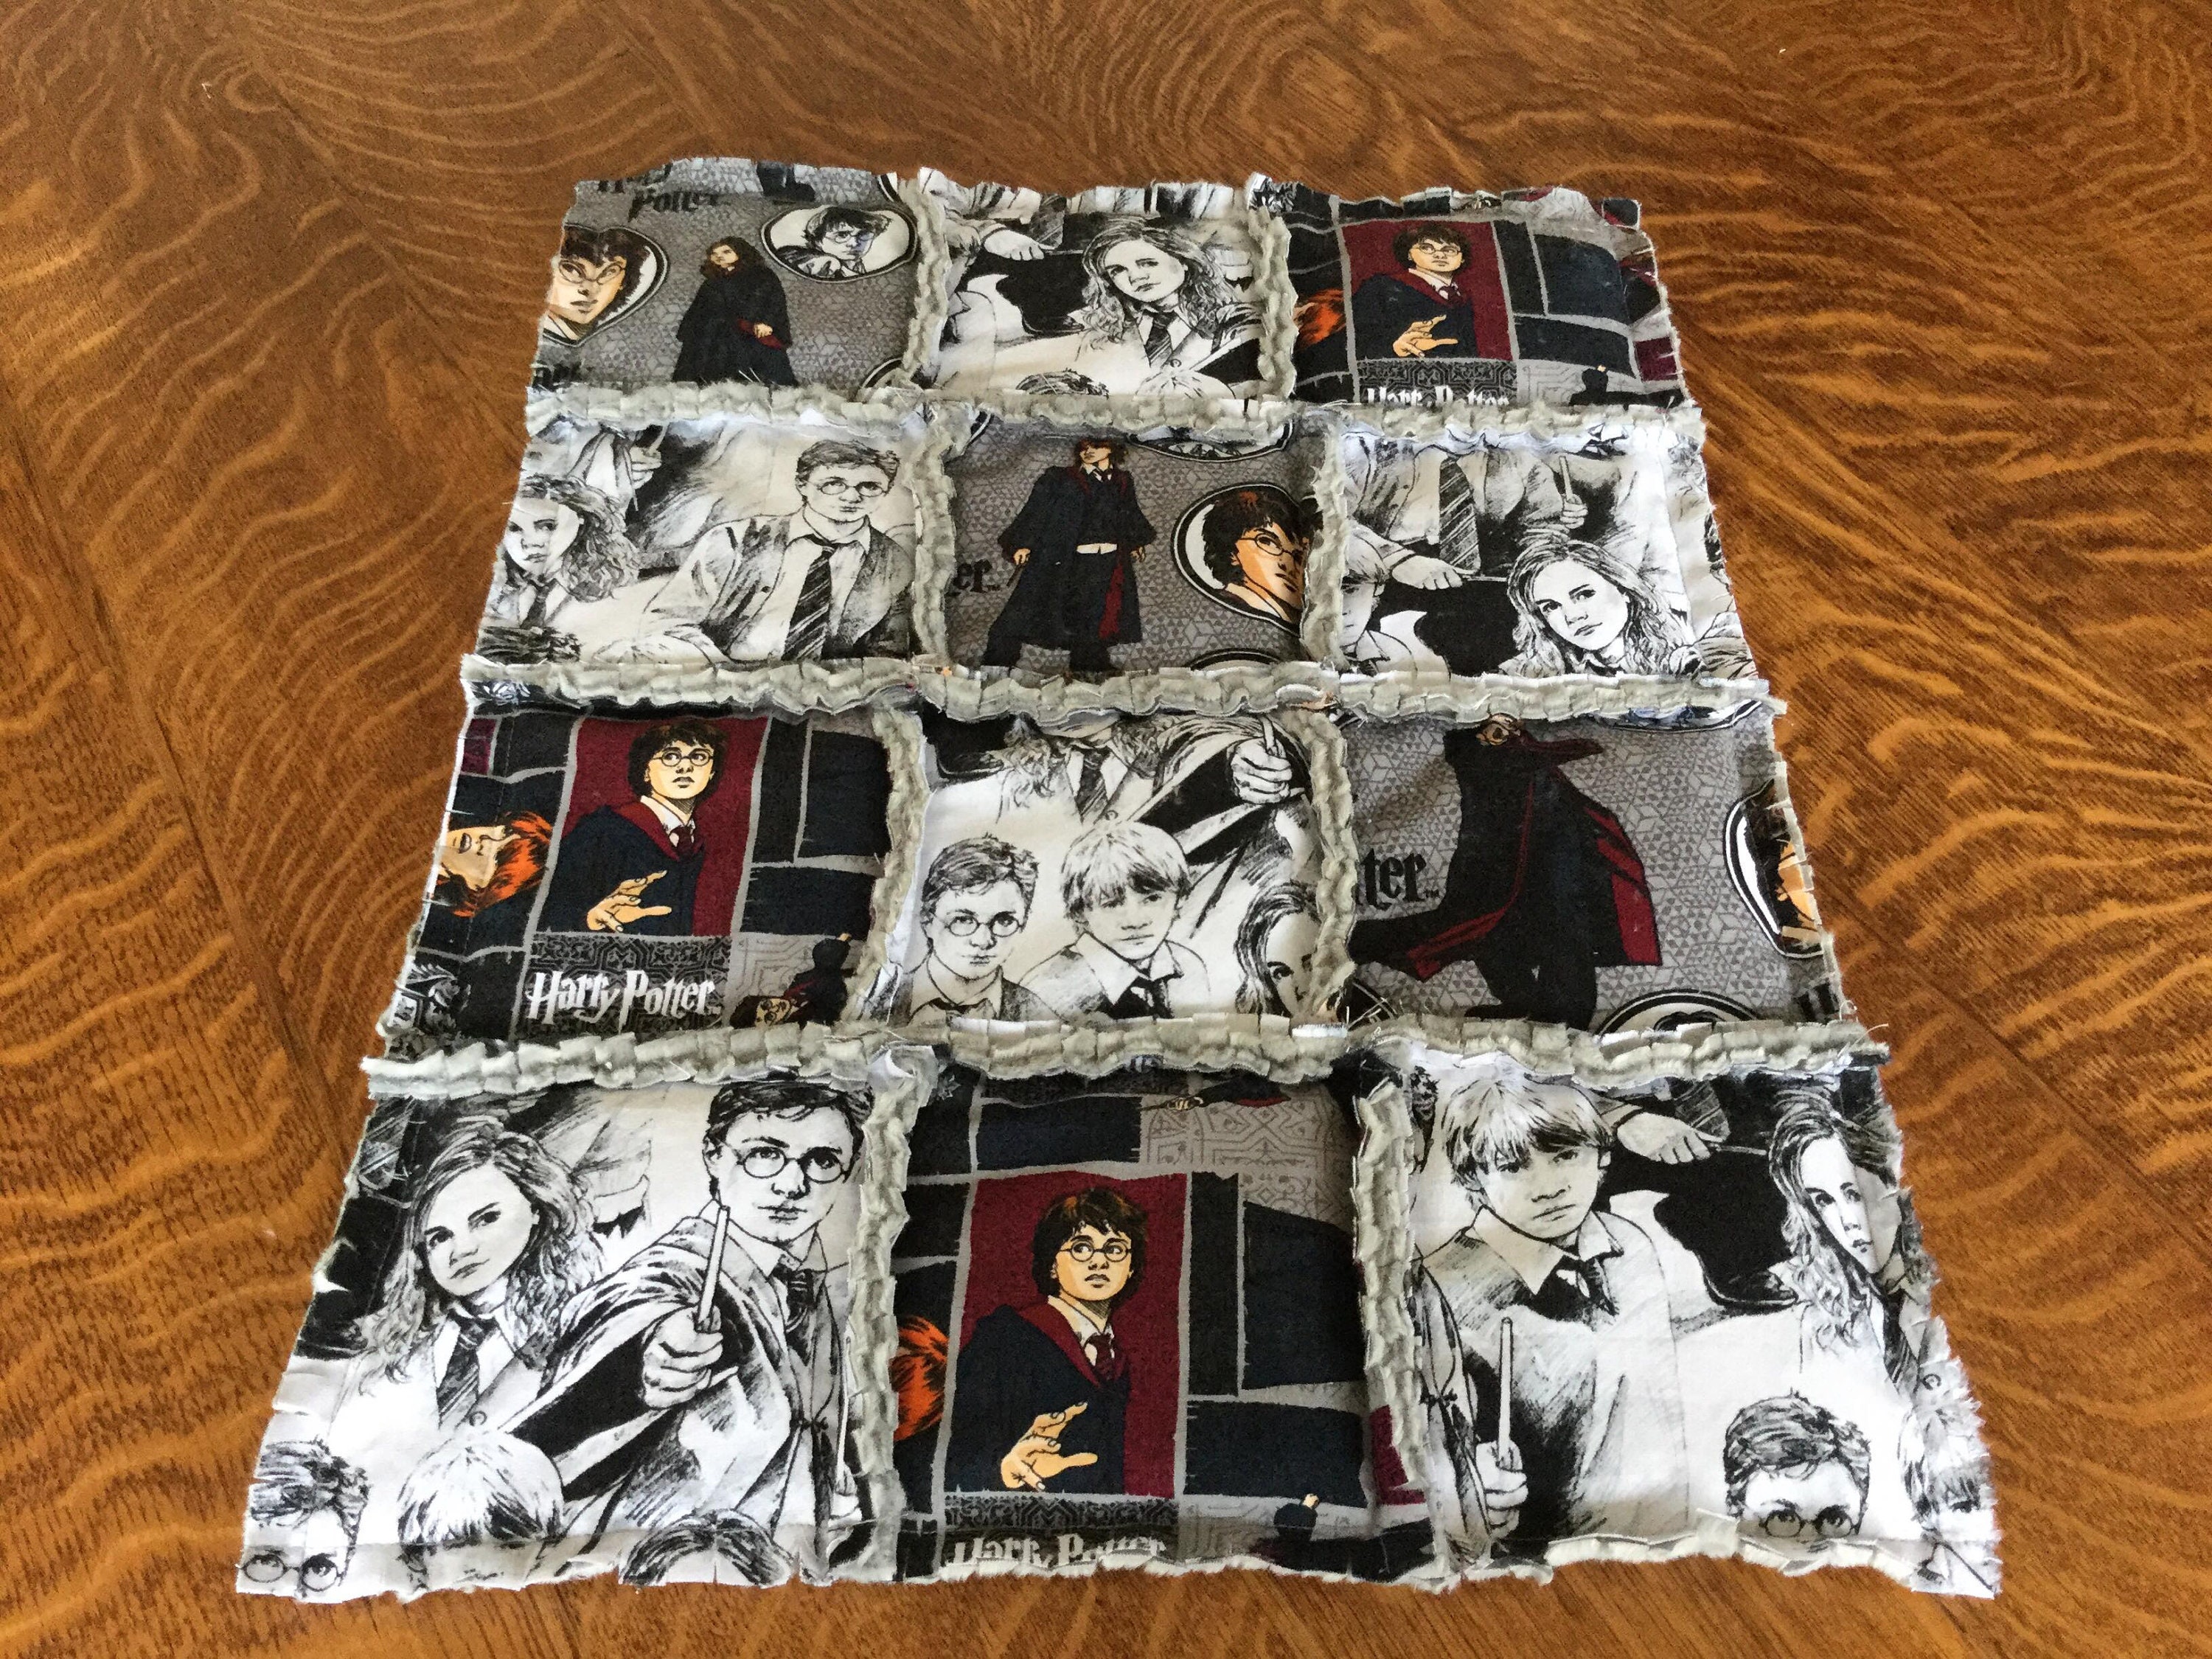 Harry Potter Weighted Lap Pad, Weighted lap blanket, Adult/Child